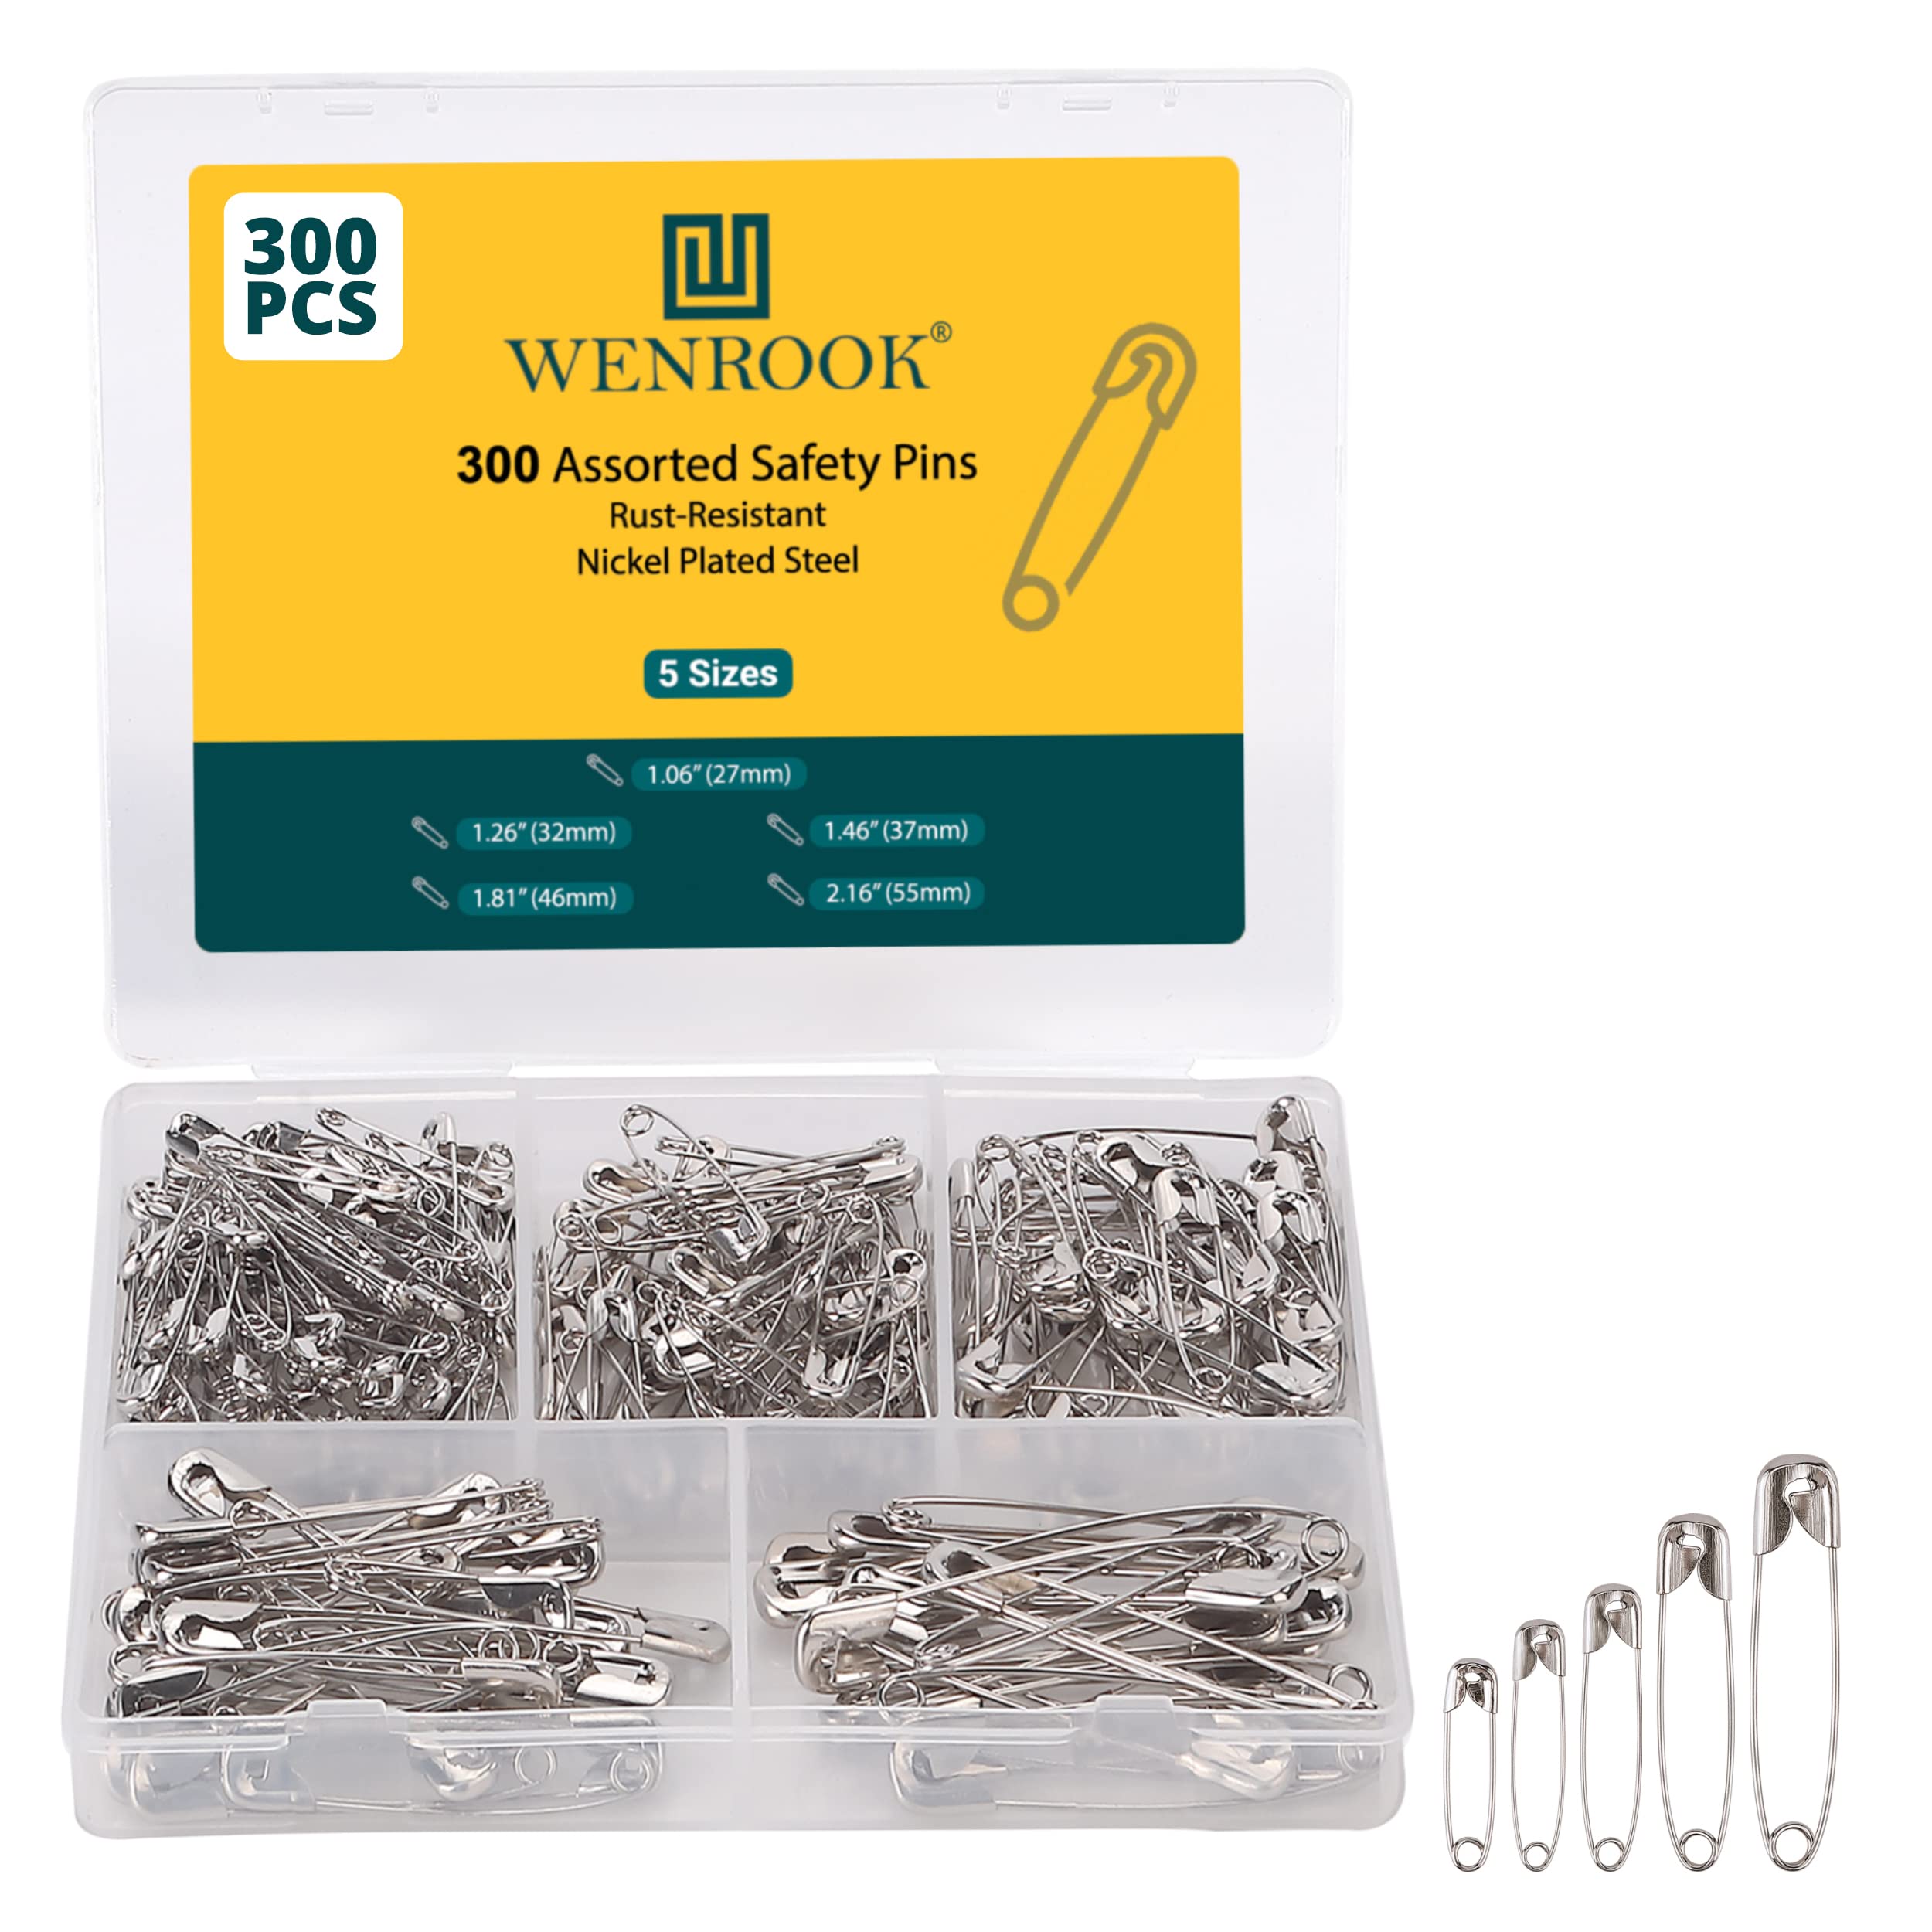 Wenrook Safety Pins Assorted 300 Pack Strong Nickel Plated Steel 5